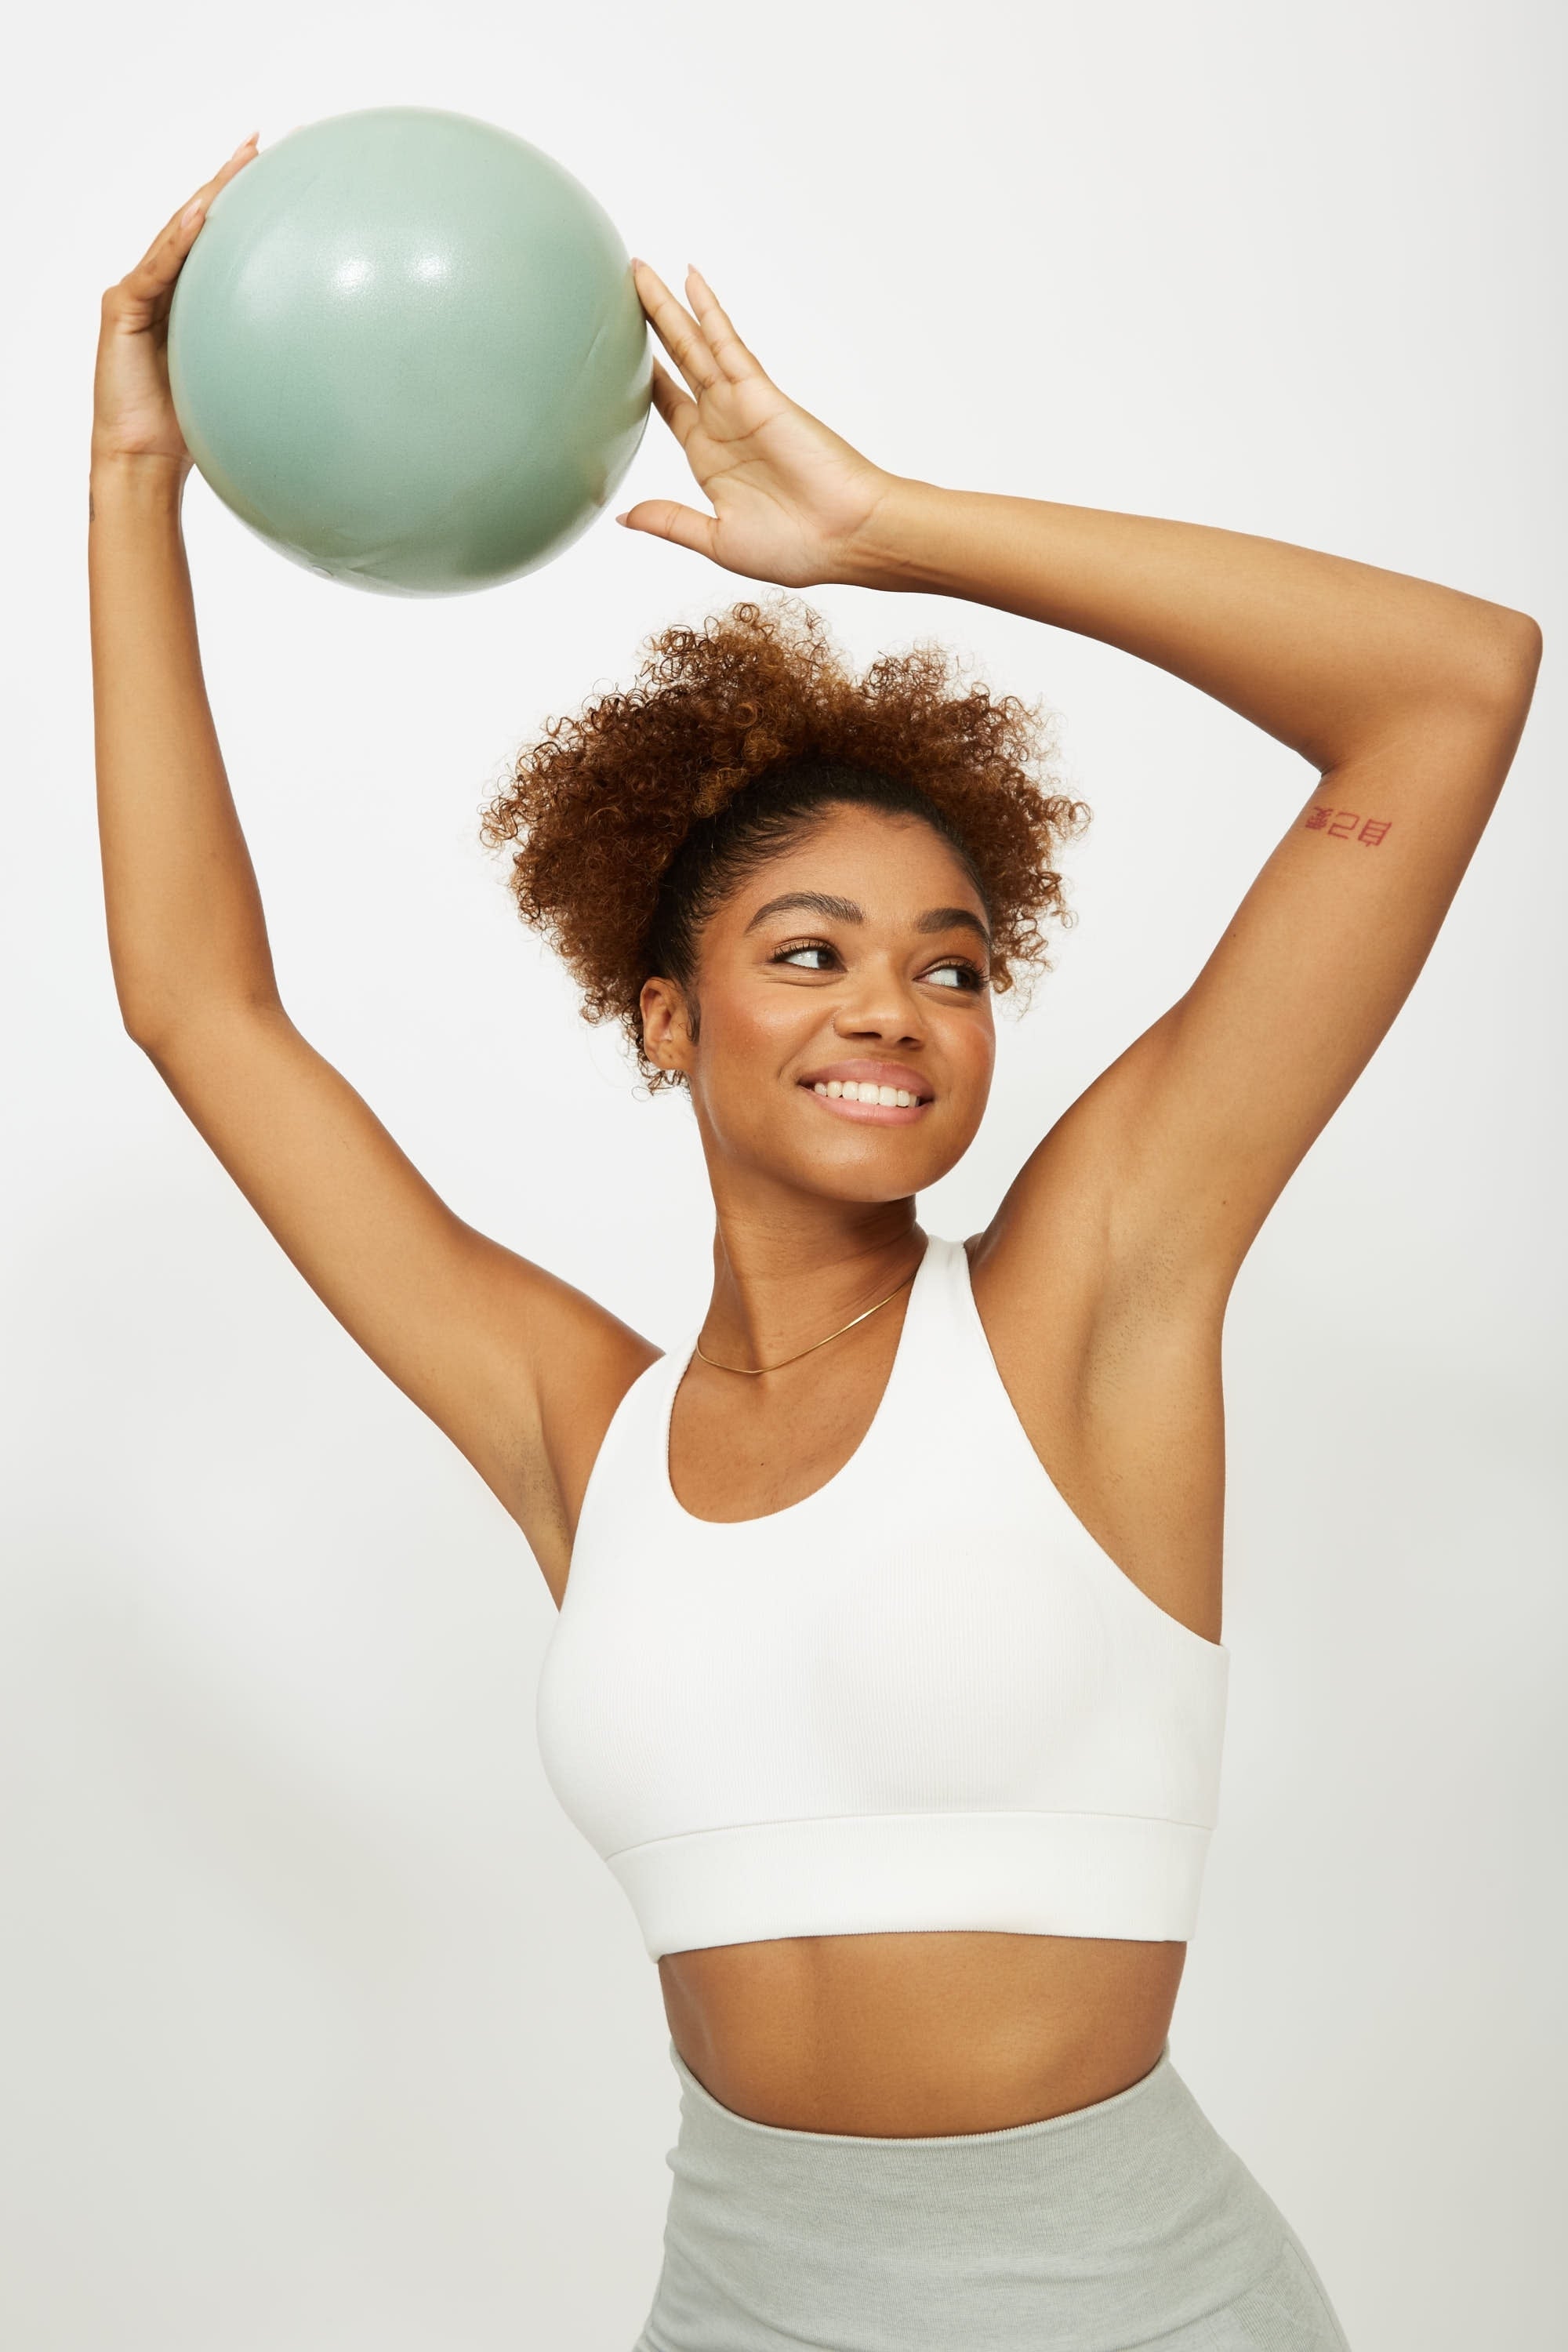 Model wearing white supportive sports bra for sustainable activewear brand, Jilla.